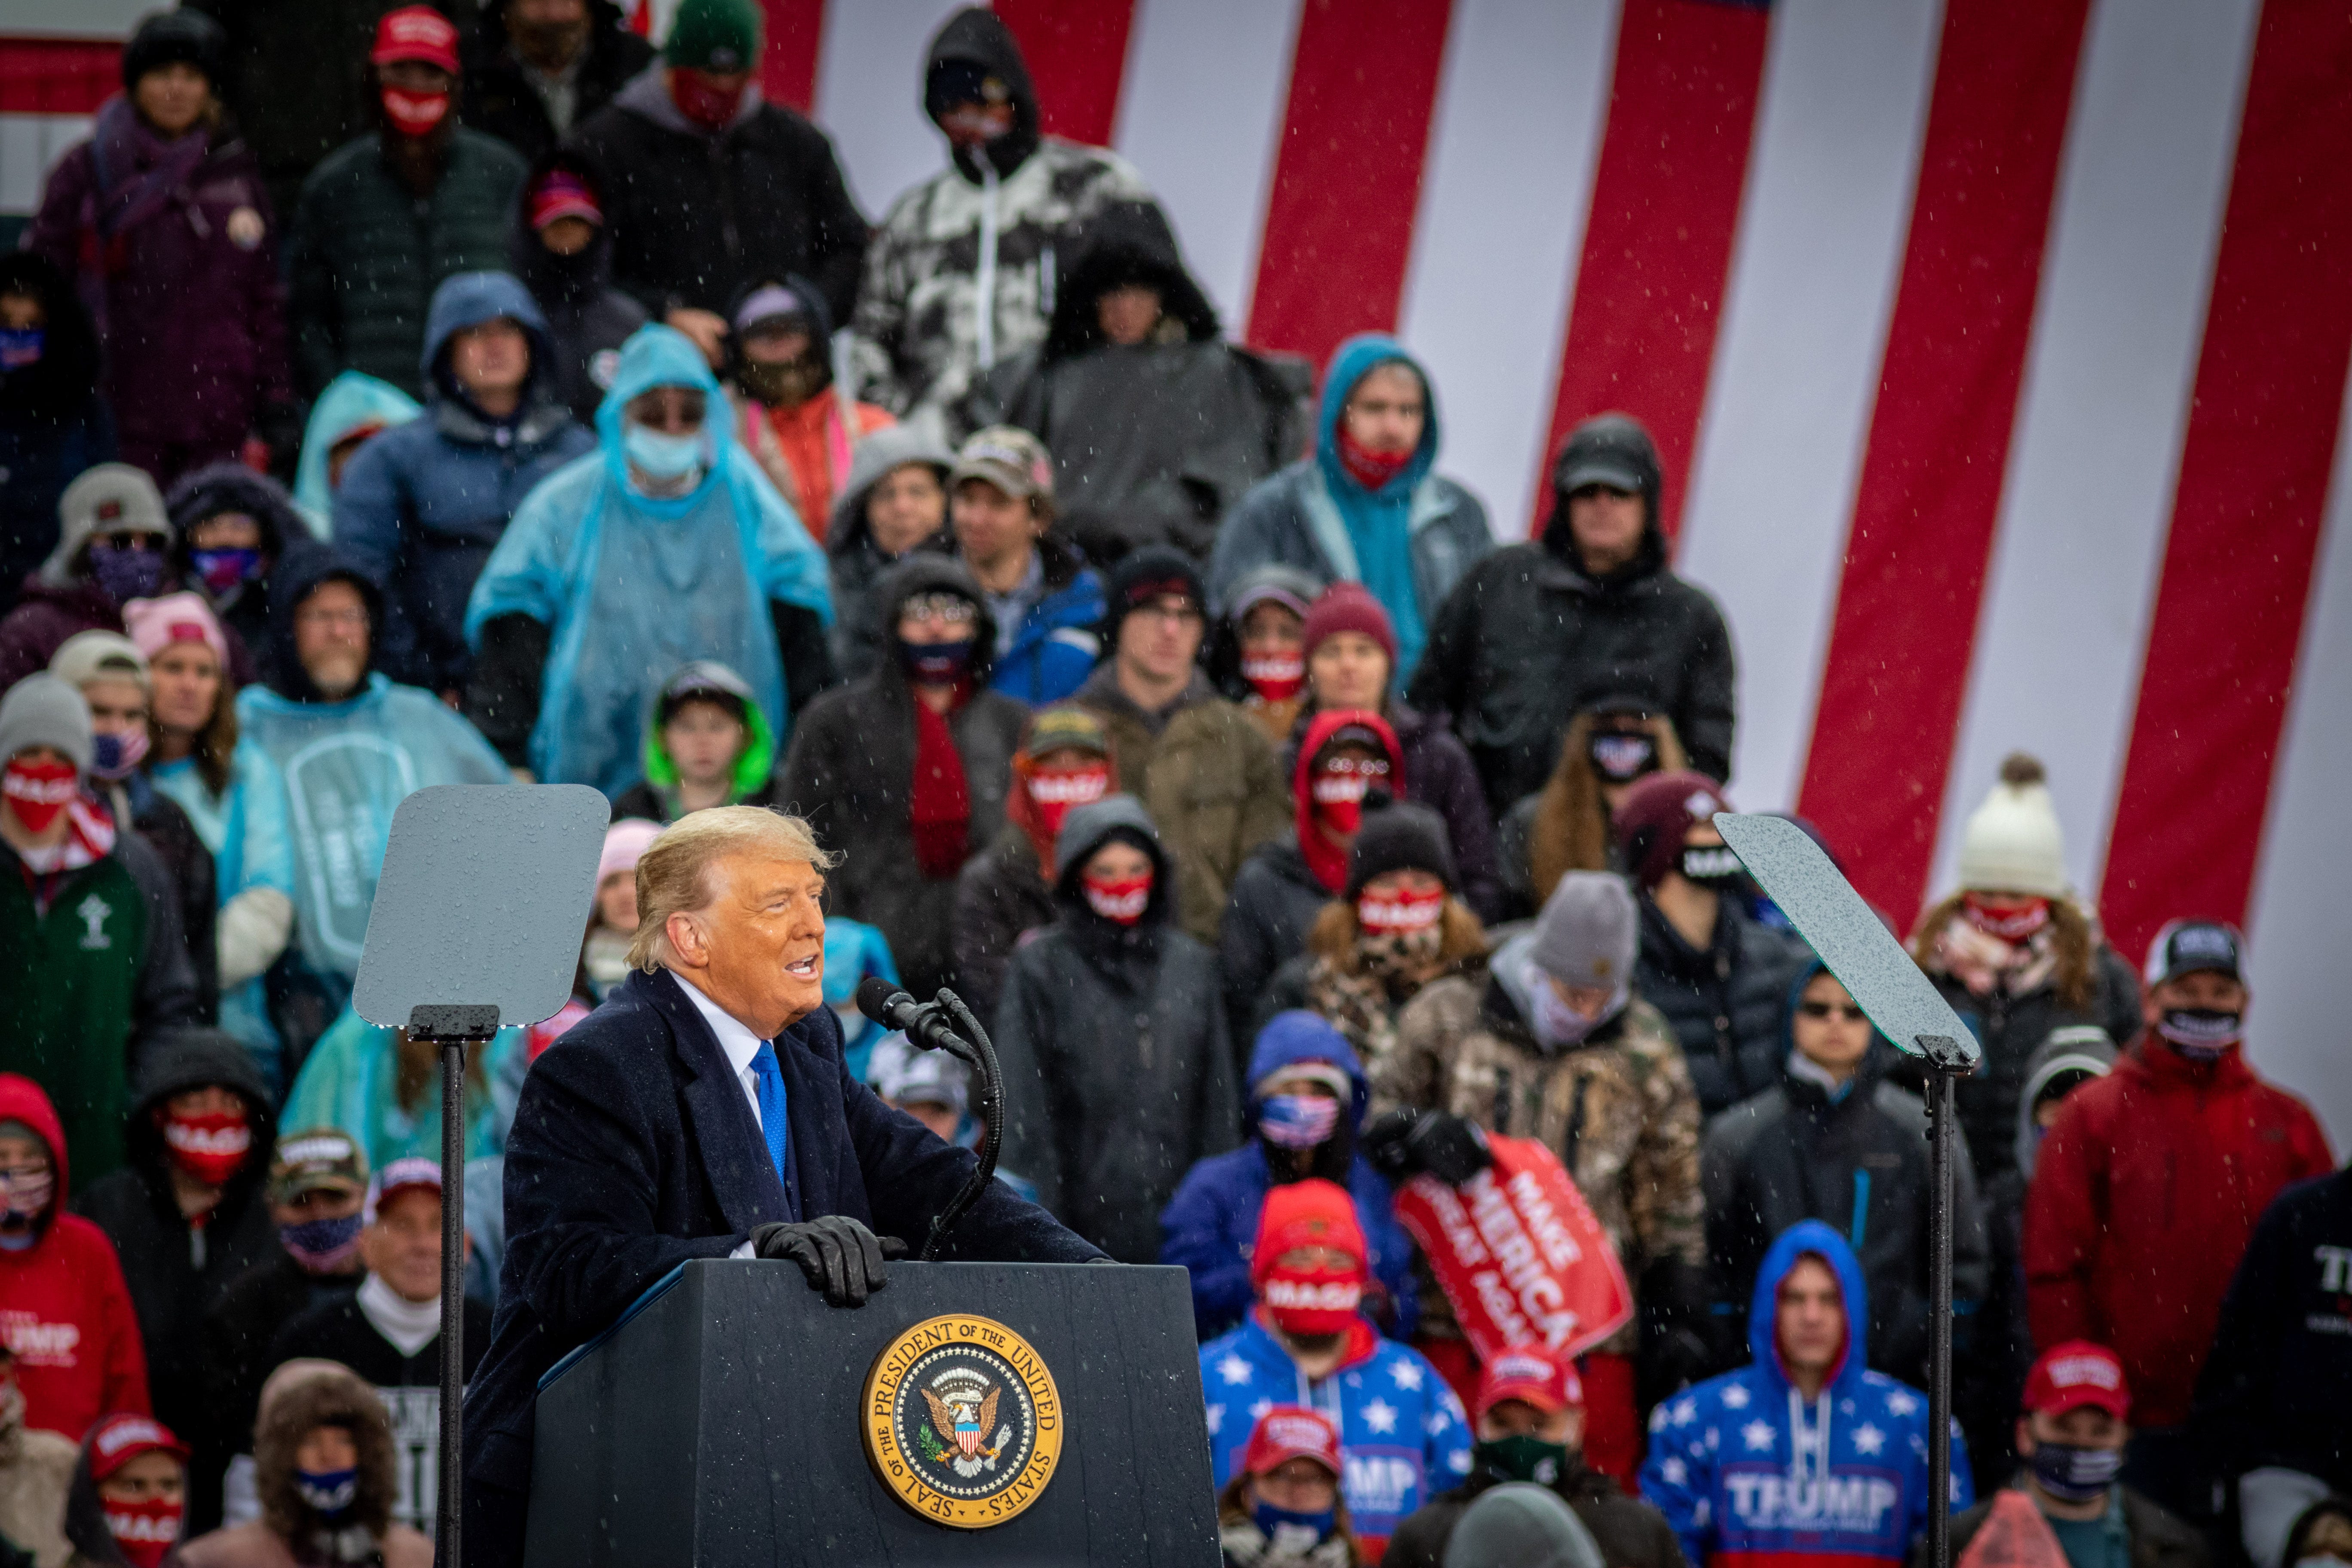 President Donald Trump addresses the crowd during a campaign rally in Lansing, Michigan on October 27, 2020, one week before the general election.